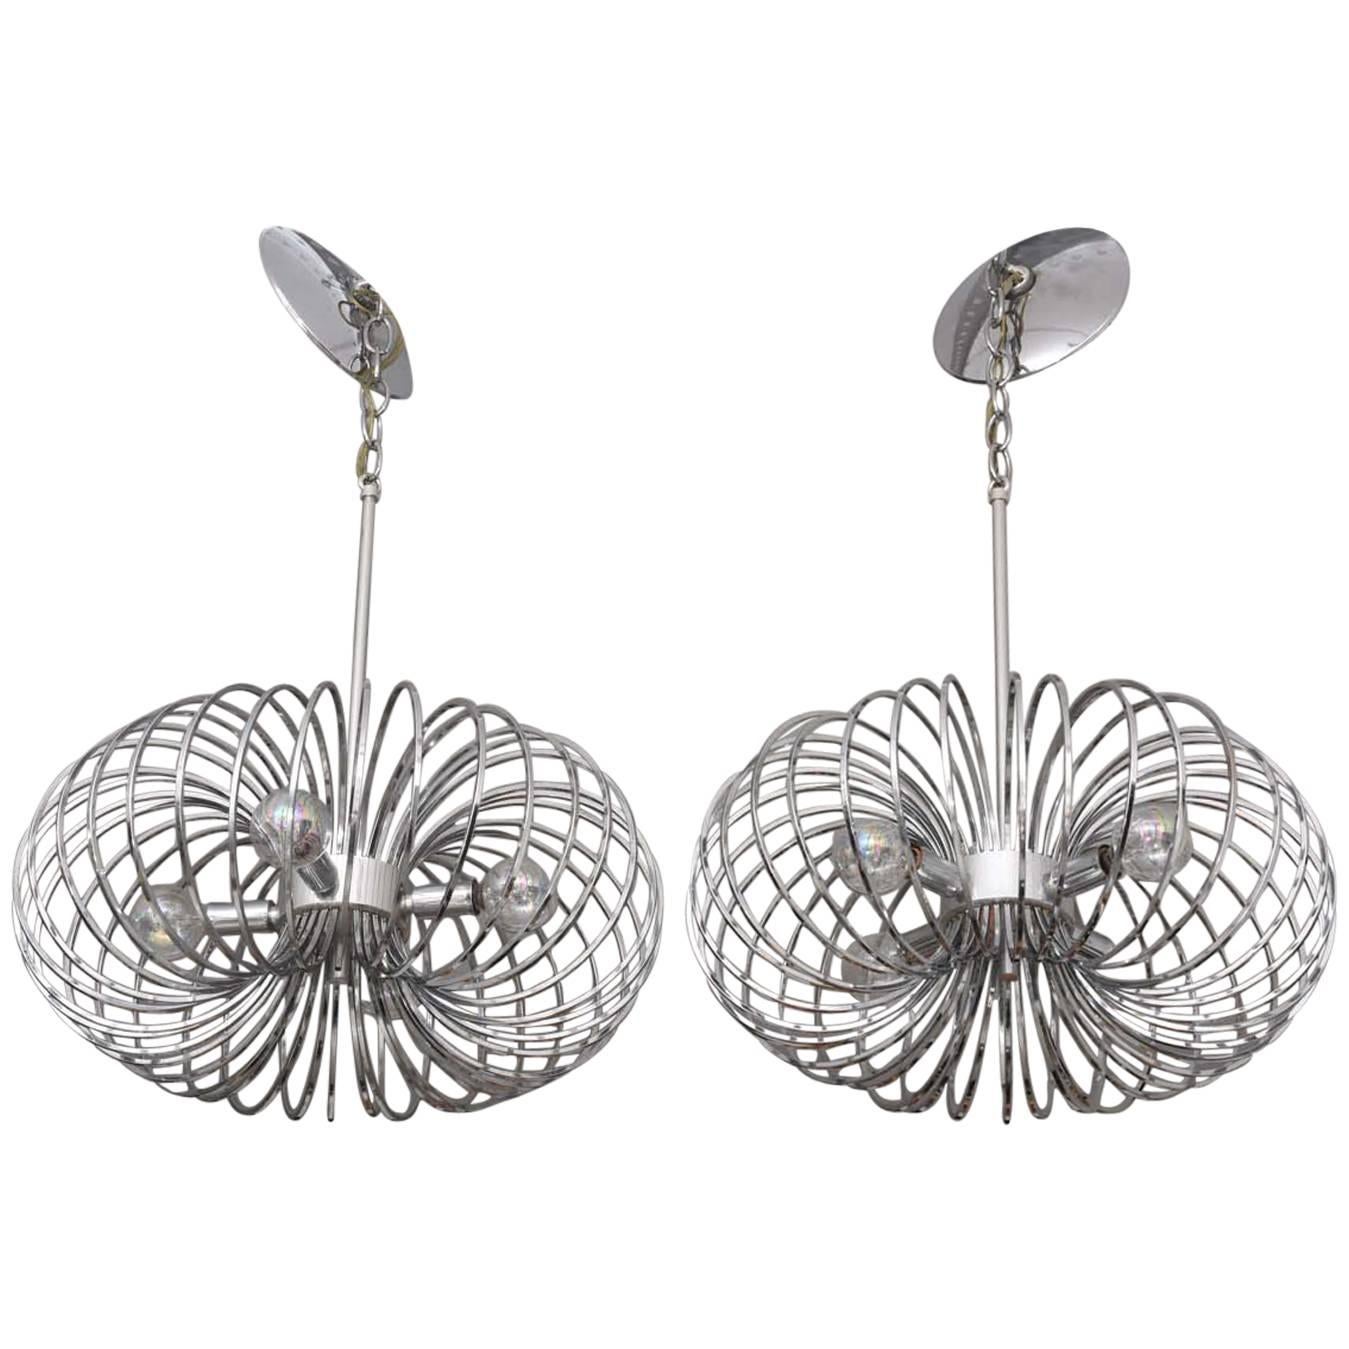 Pair of Polished Chrome Chandeliers by Sciolari